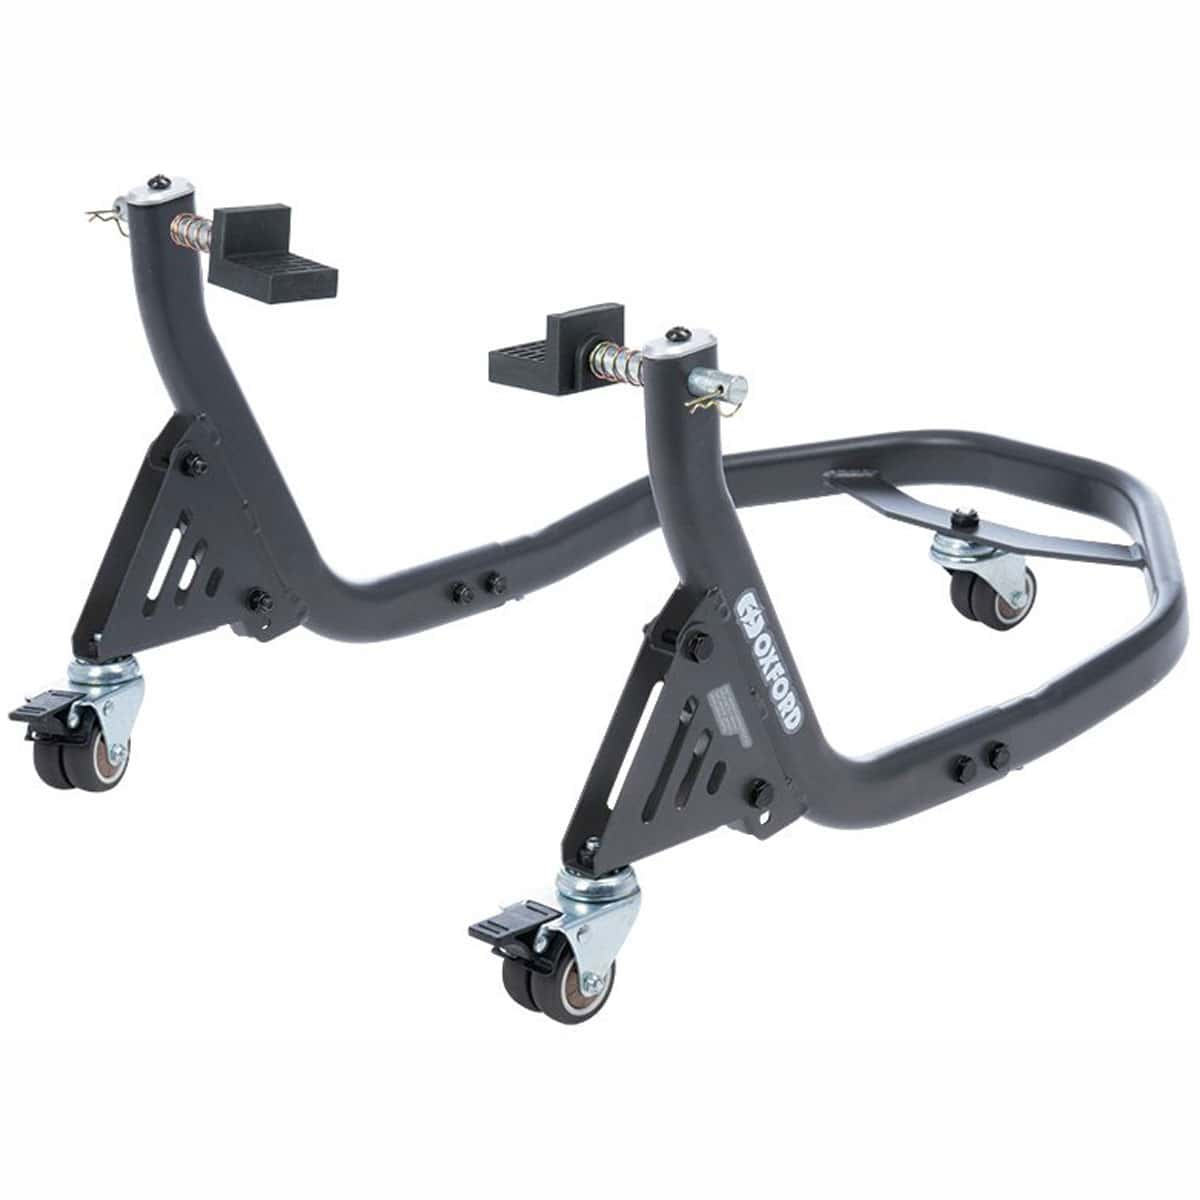 Oxford Zero-G Dolly Stands - Front & Rear